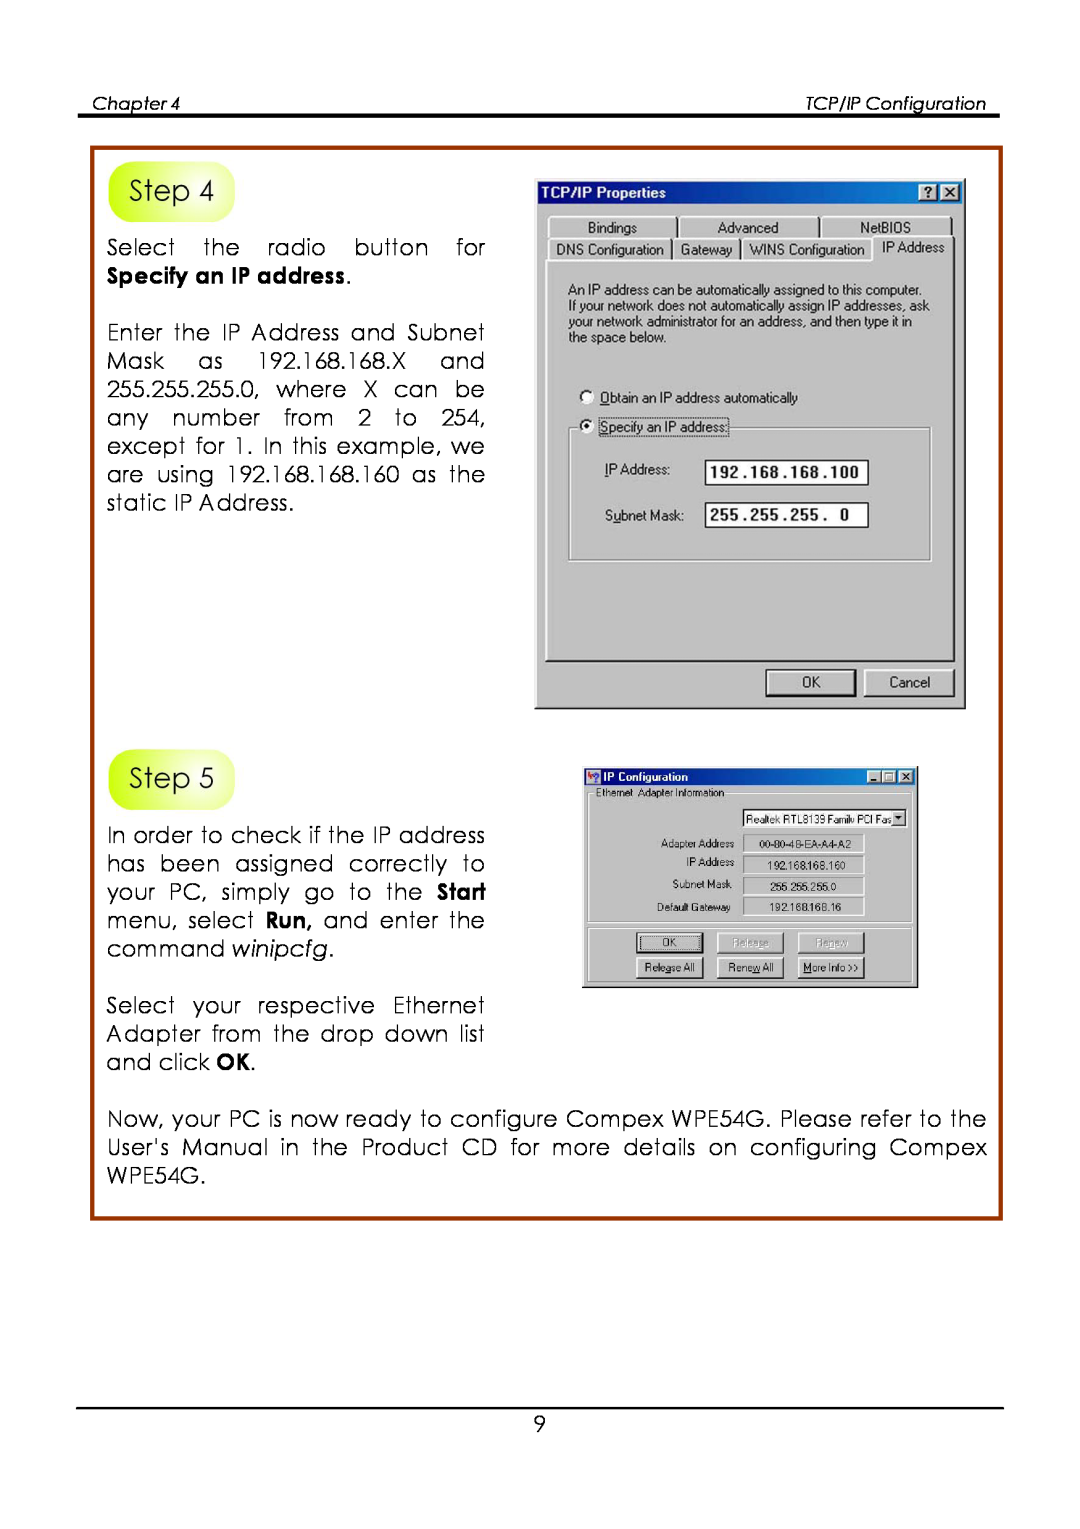 Compex Systems WPE54G manual Specify an IP address 